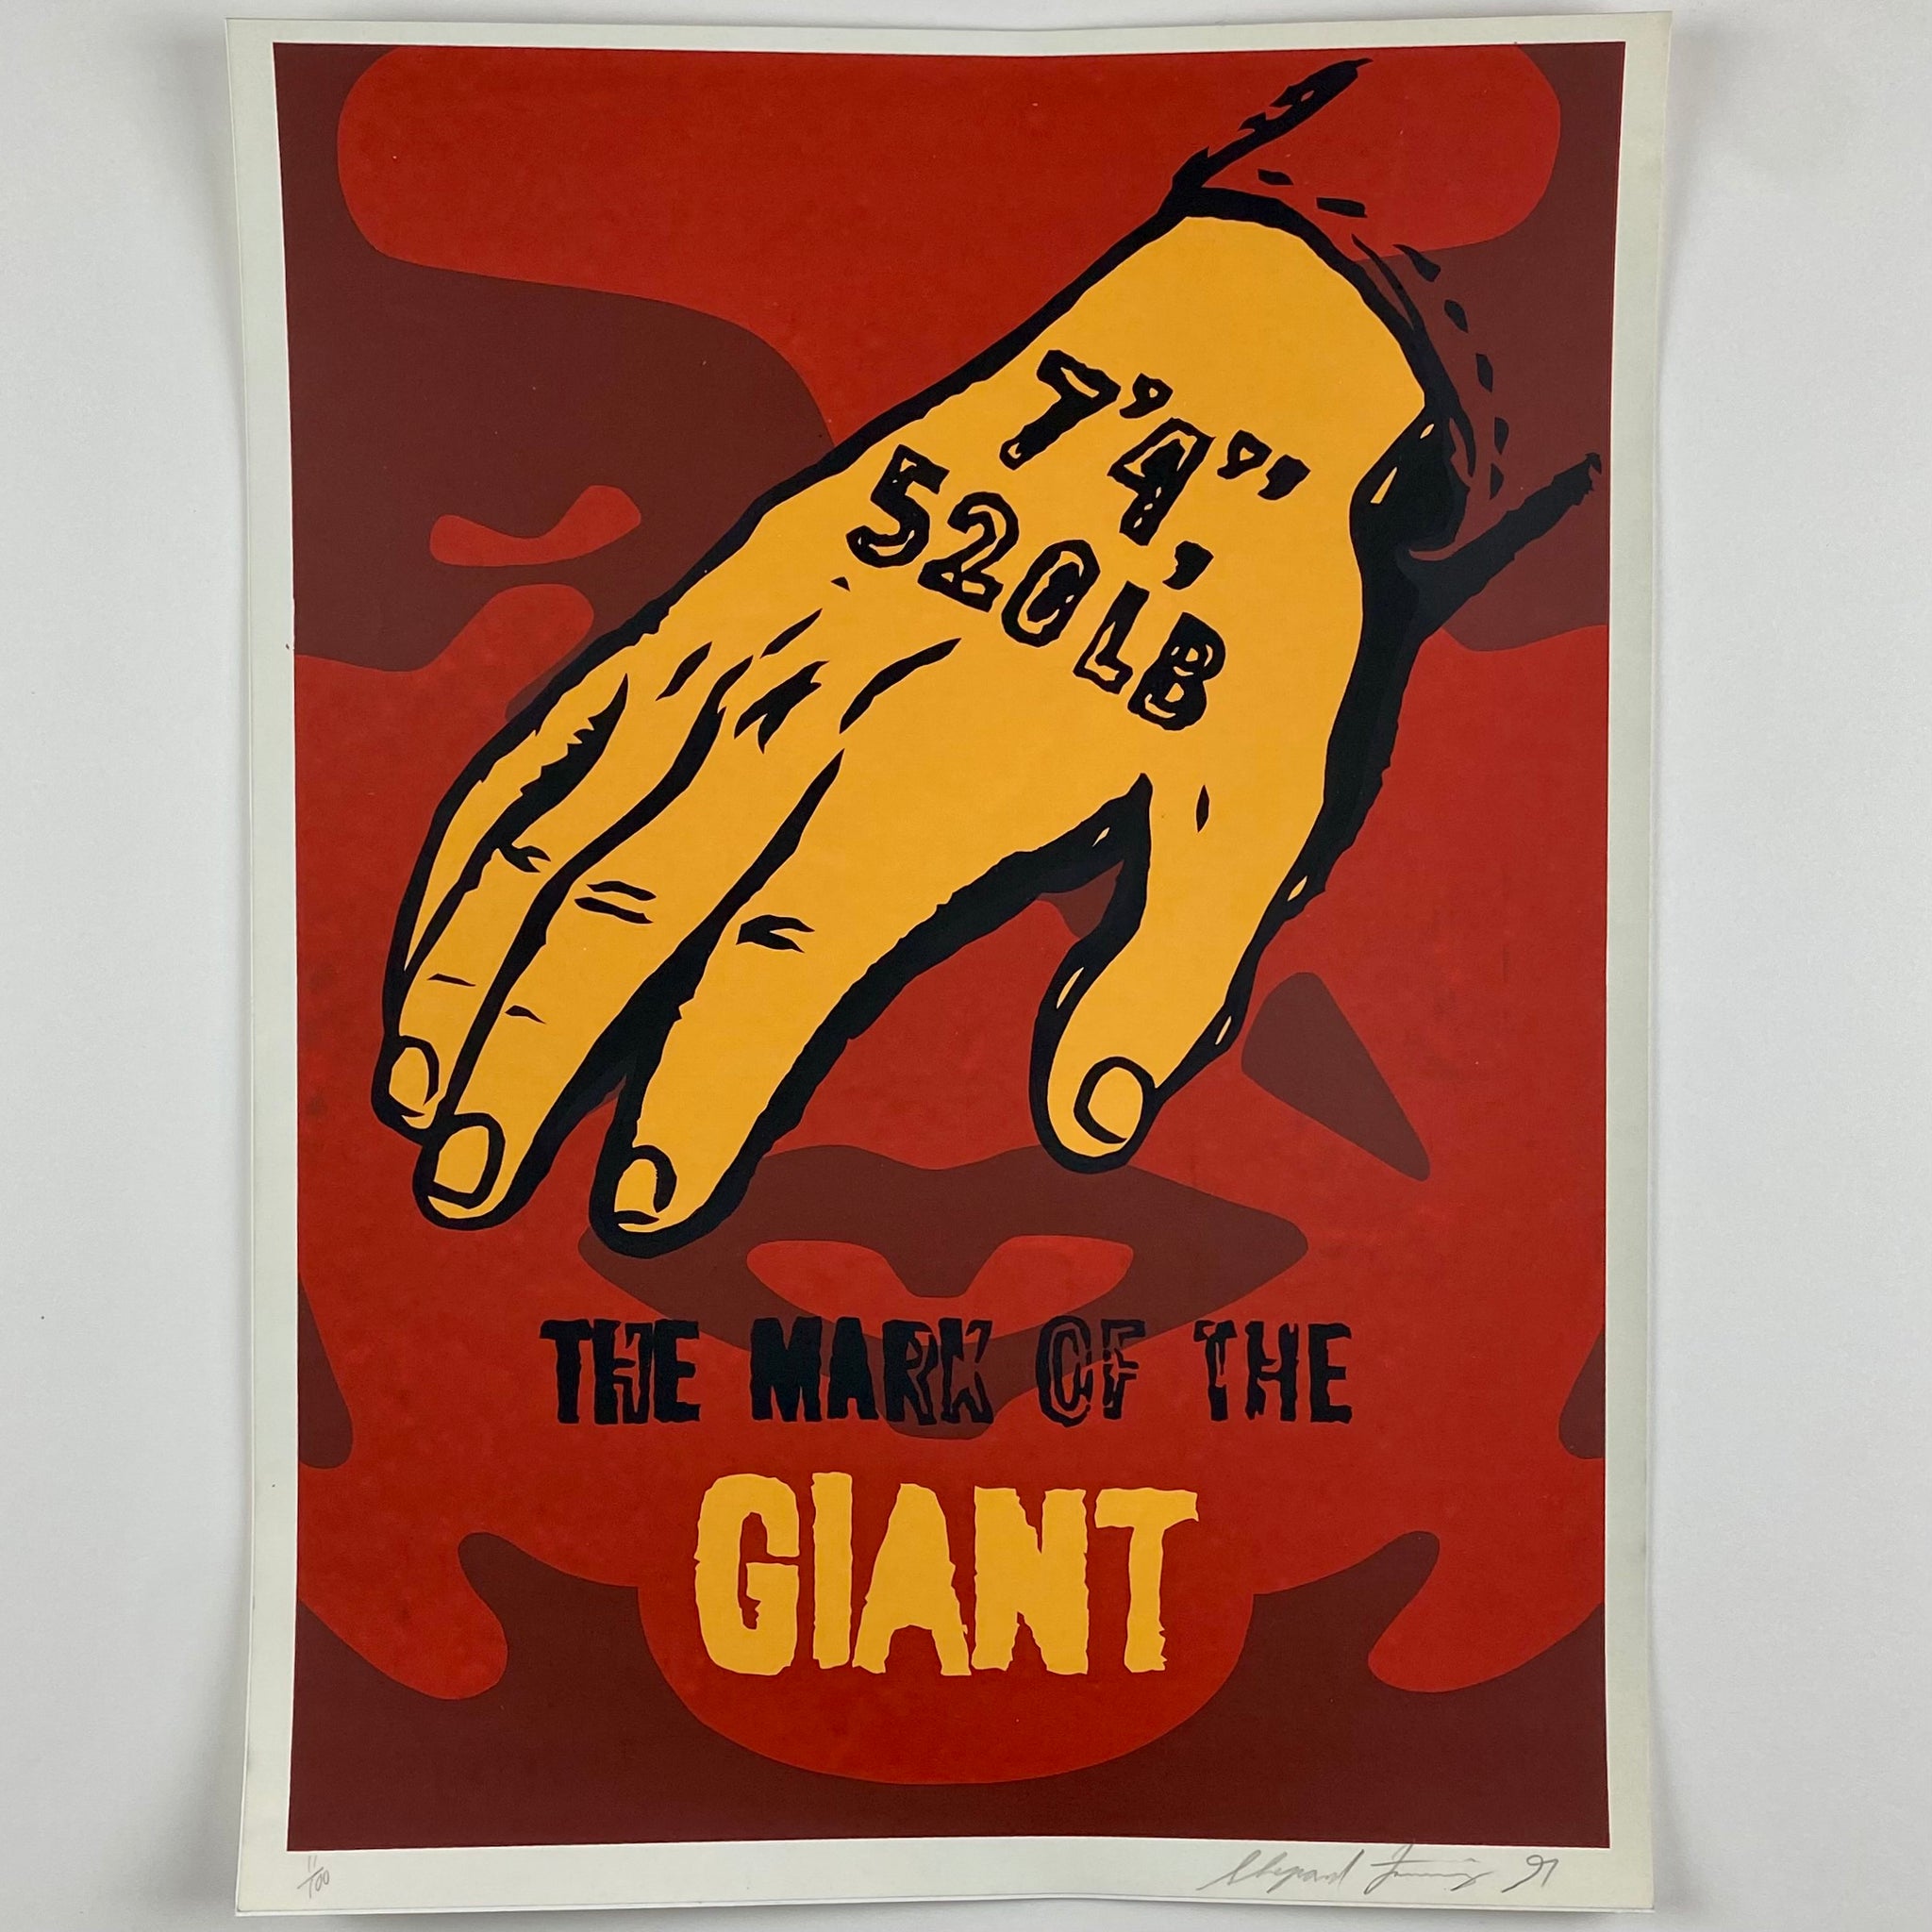 SHEPARD FAIREY (OBEY GIANT) - 1997 - MARK OF THE GIANT